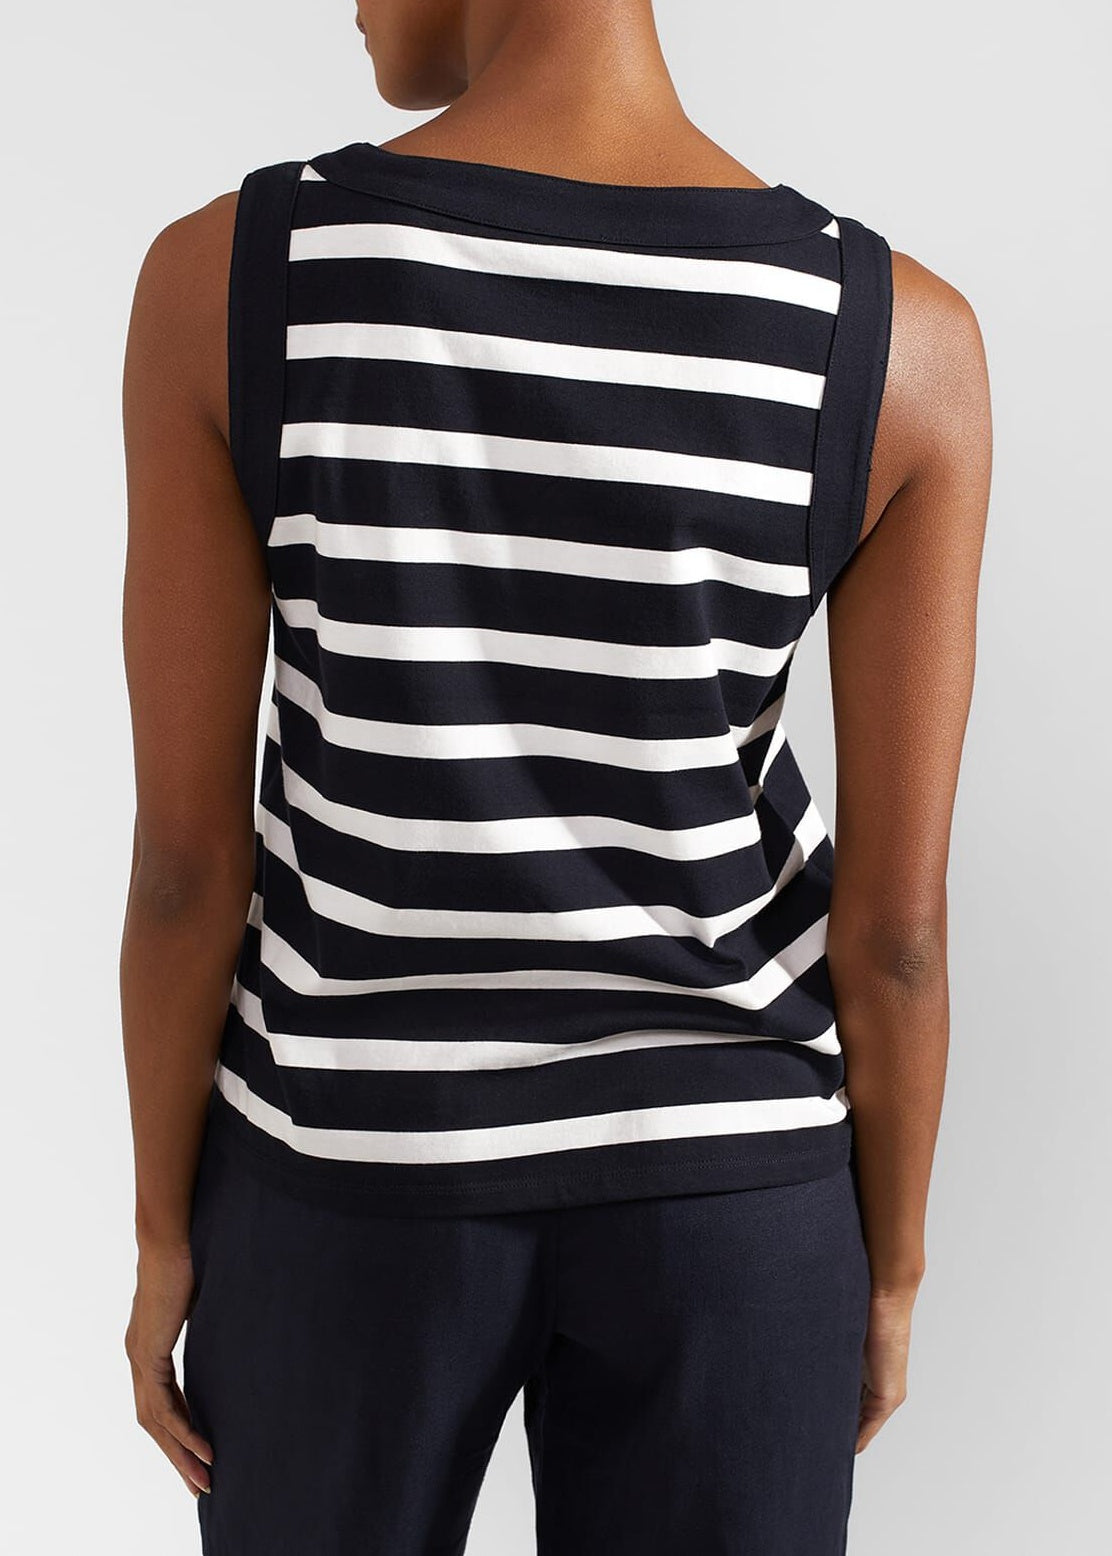 Maddy Striped Top 0124/2983/1144l00 Navy-Ivory